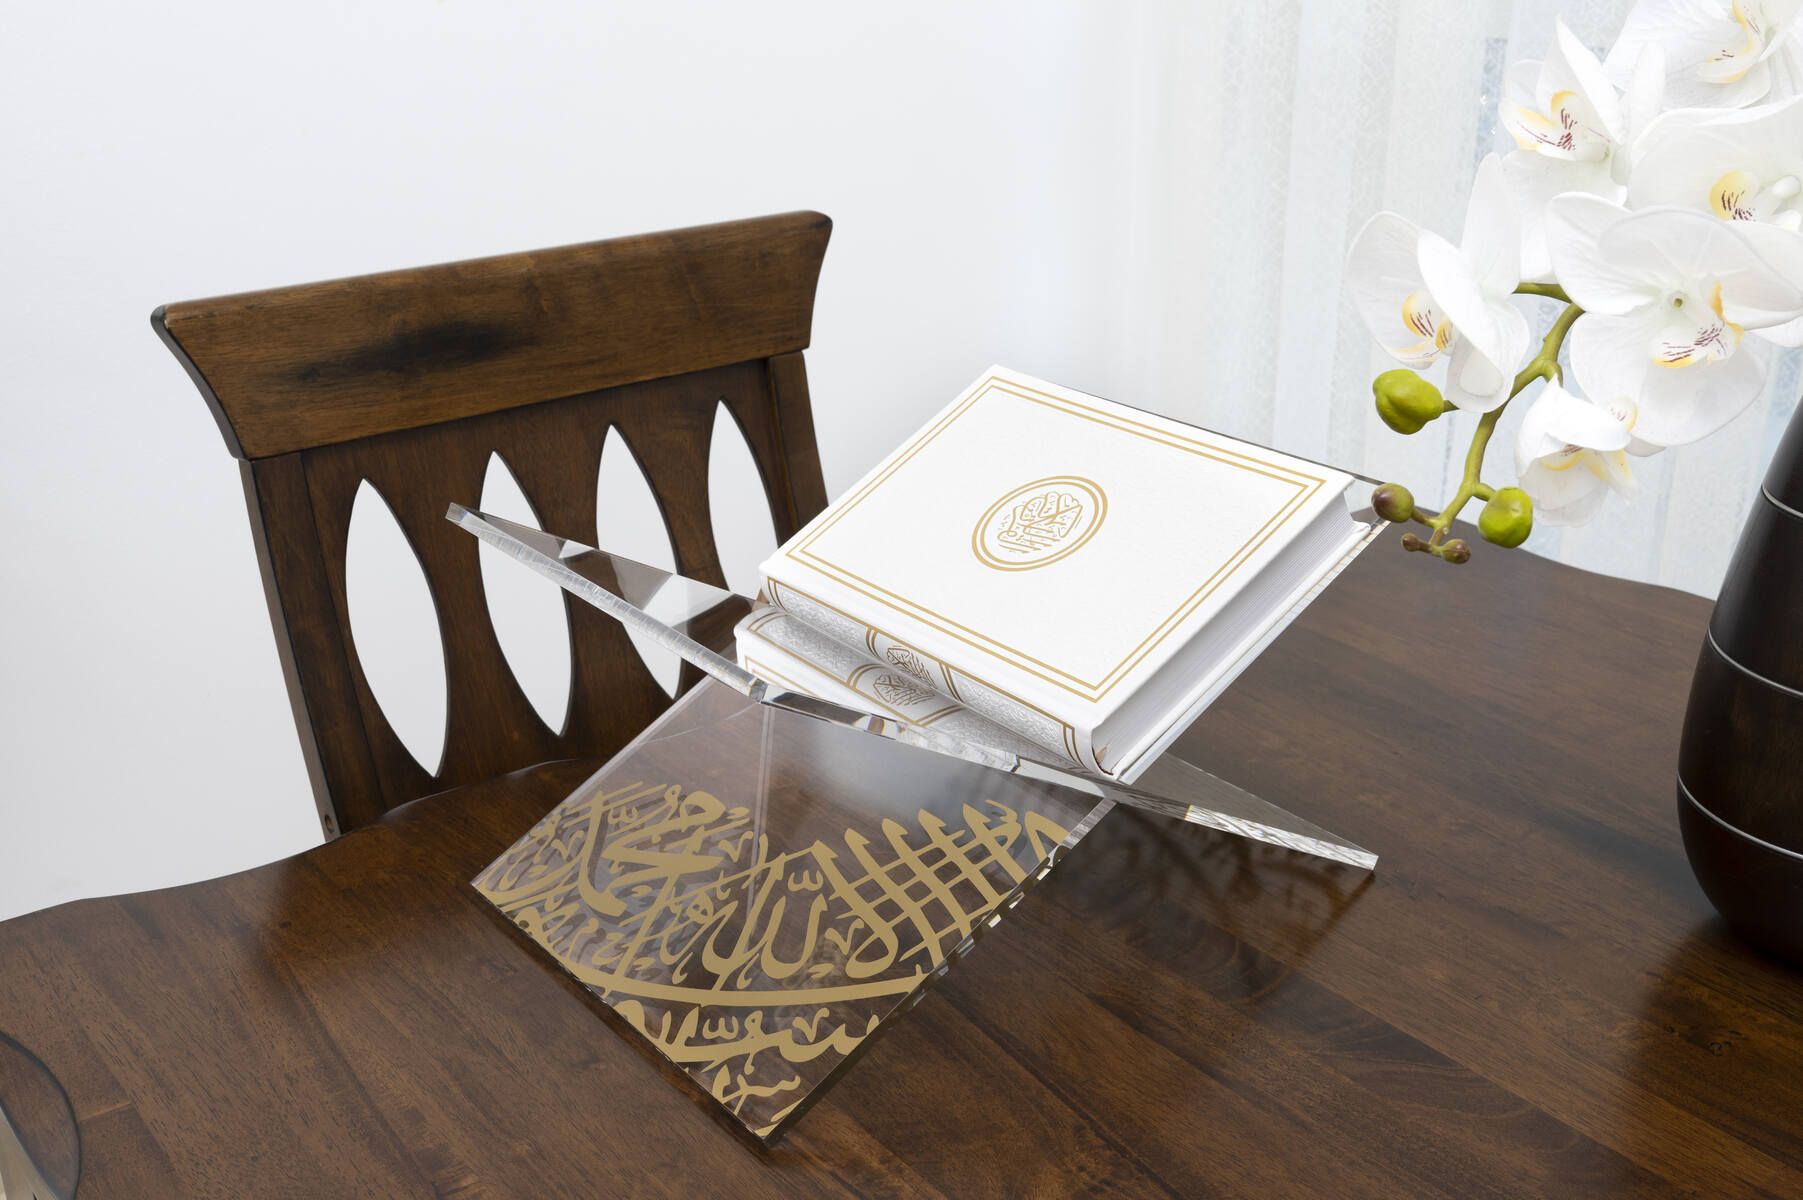 Quran Stand - Arabic Caligraphy